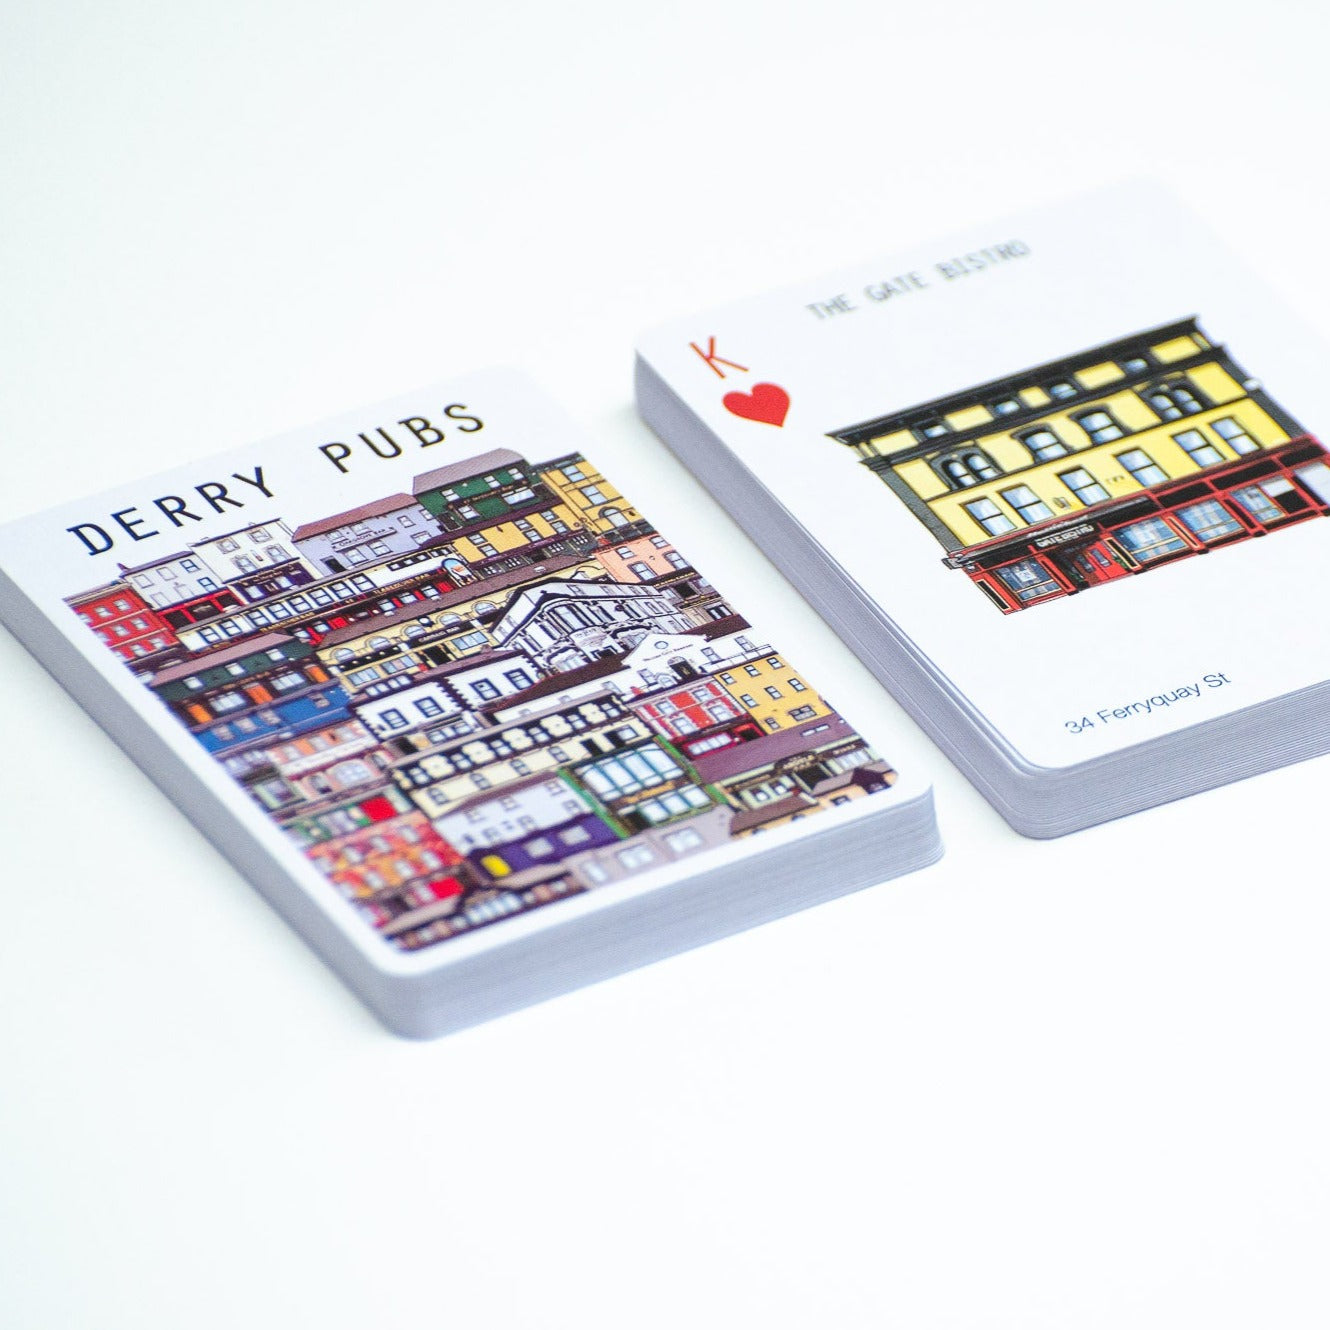 Derry Playing Cards